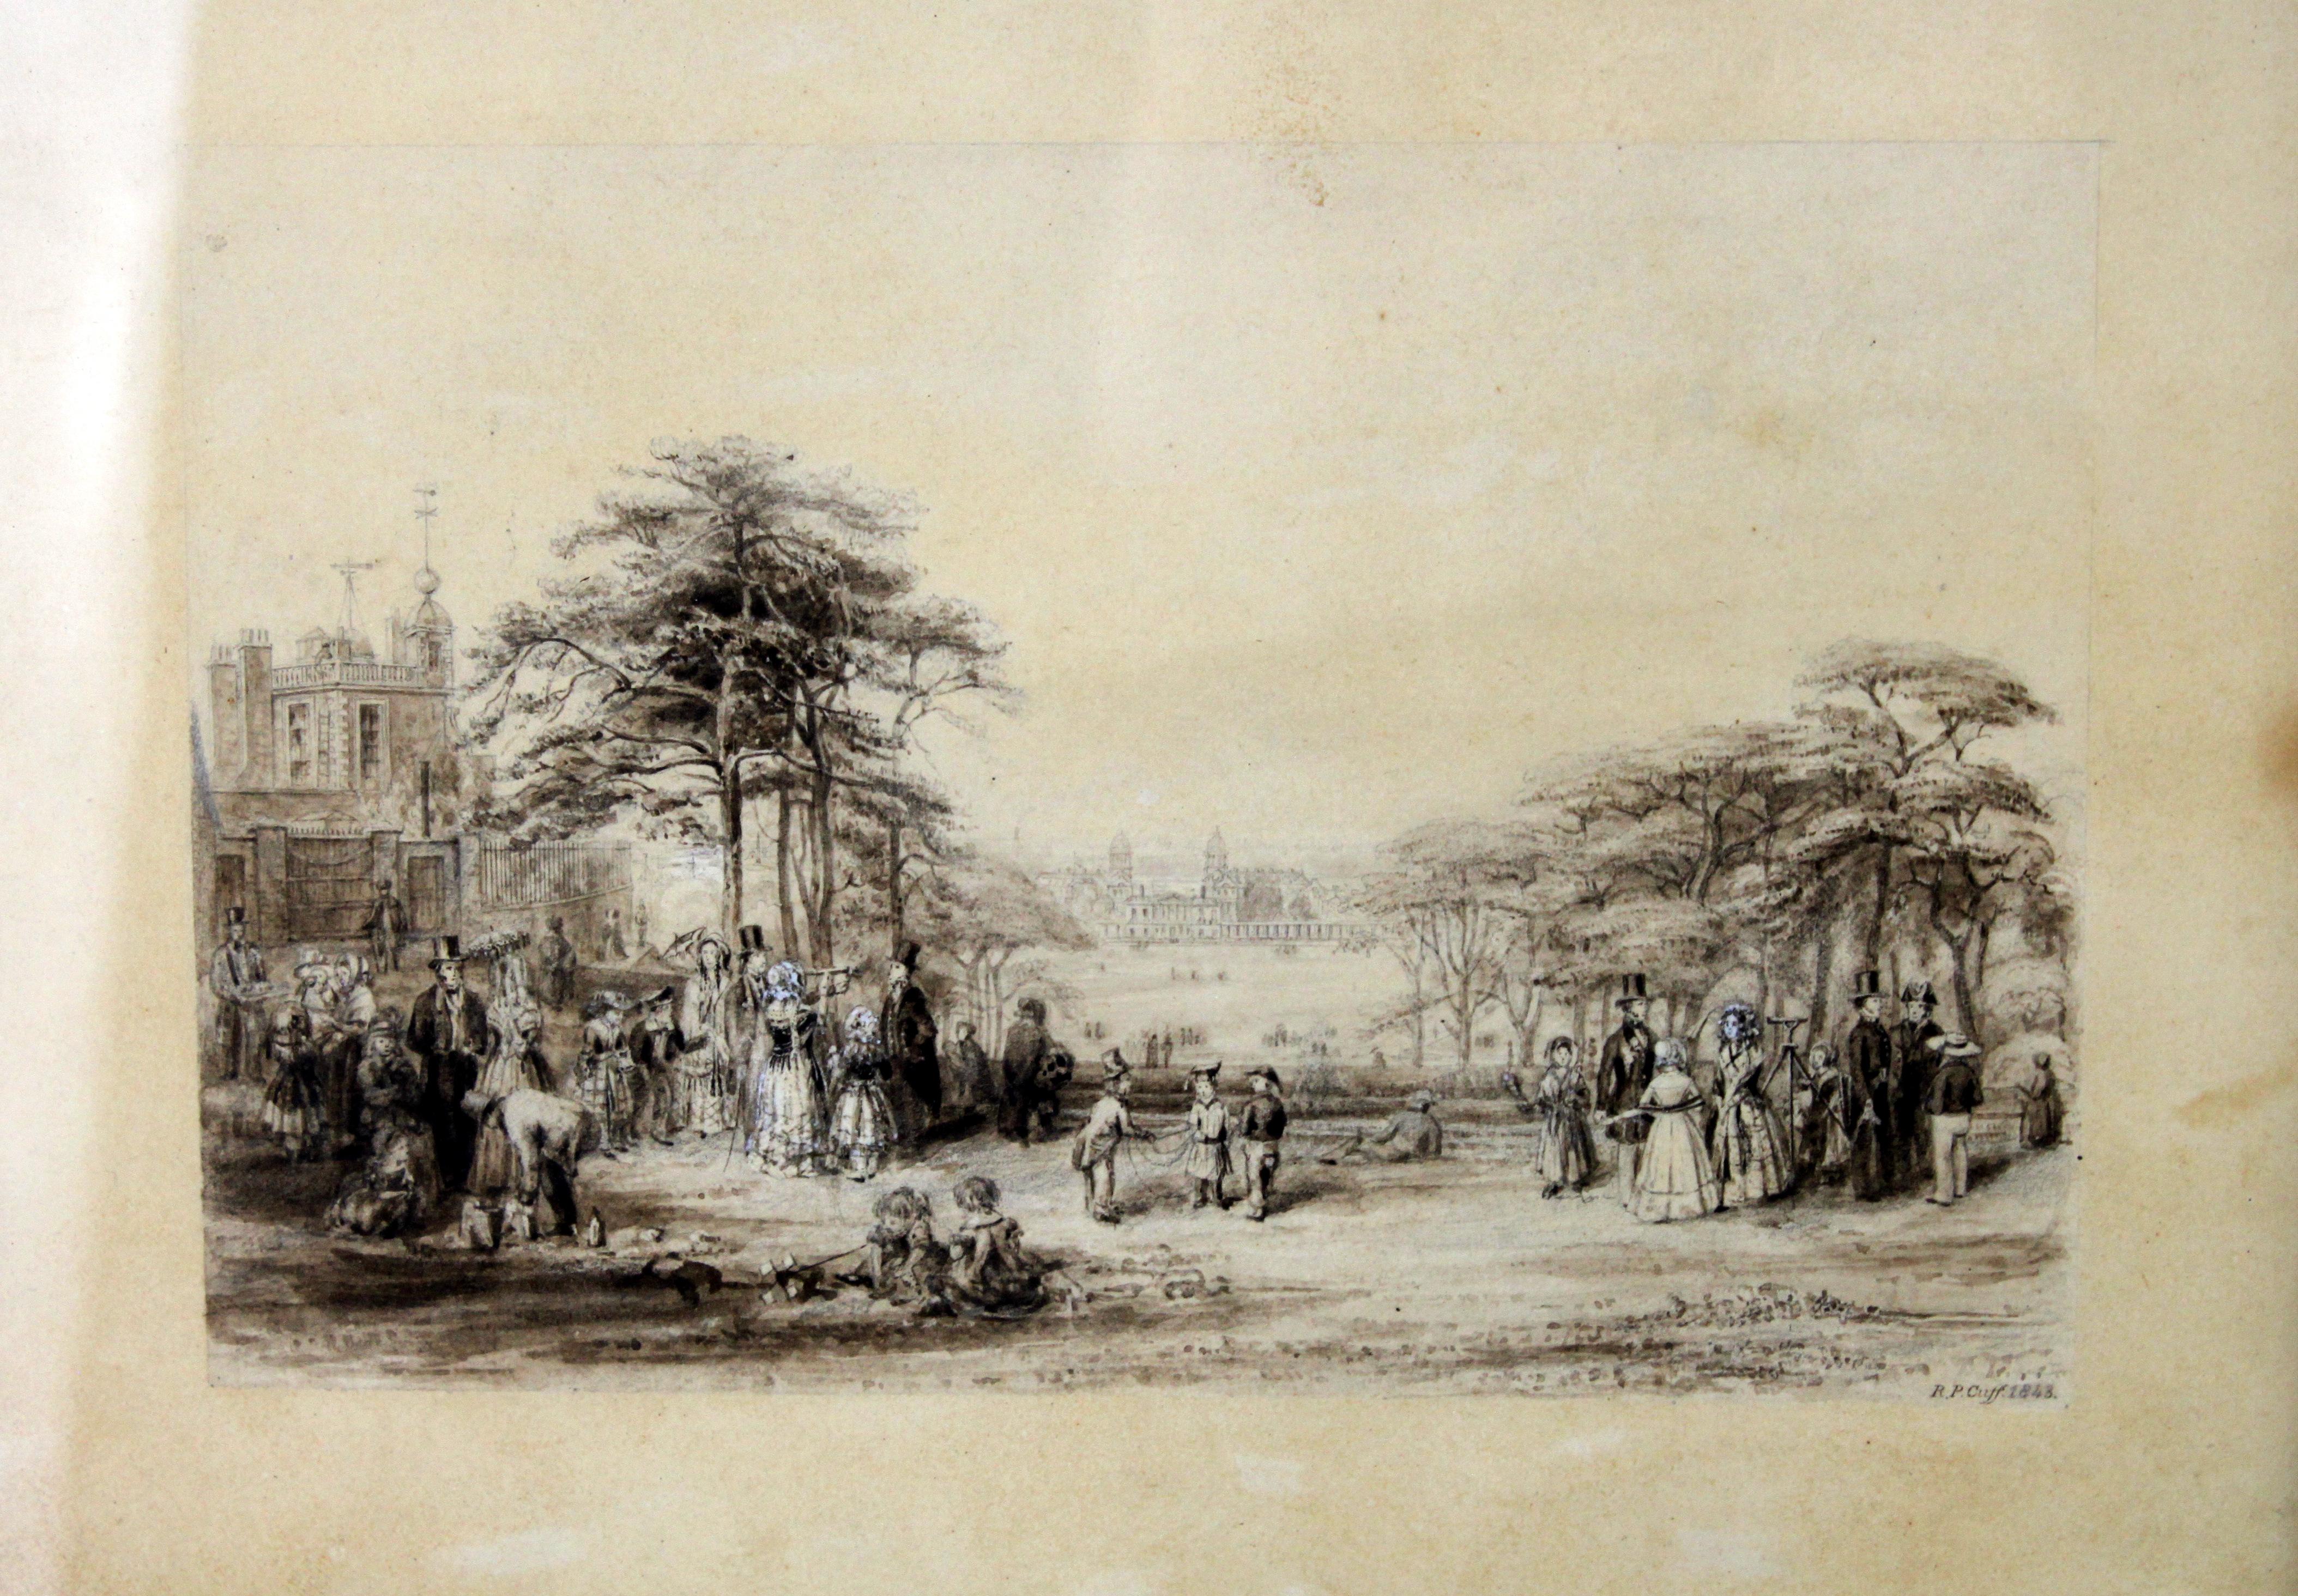 Victorian landscape drawing
Artist: Richard Paminter Cuff
Technique: Brush and watercolor and gray wash over graphite
Signed lower right hand signed, R.P Cuff 1843

Engraver, apprenticed in Camberwell. In later years took up watercolor and